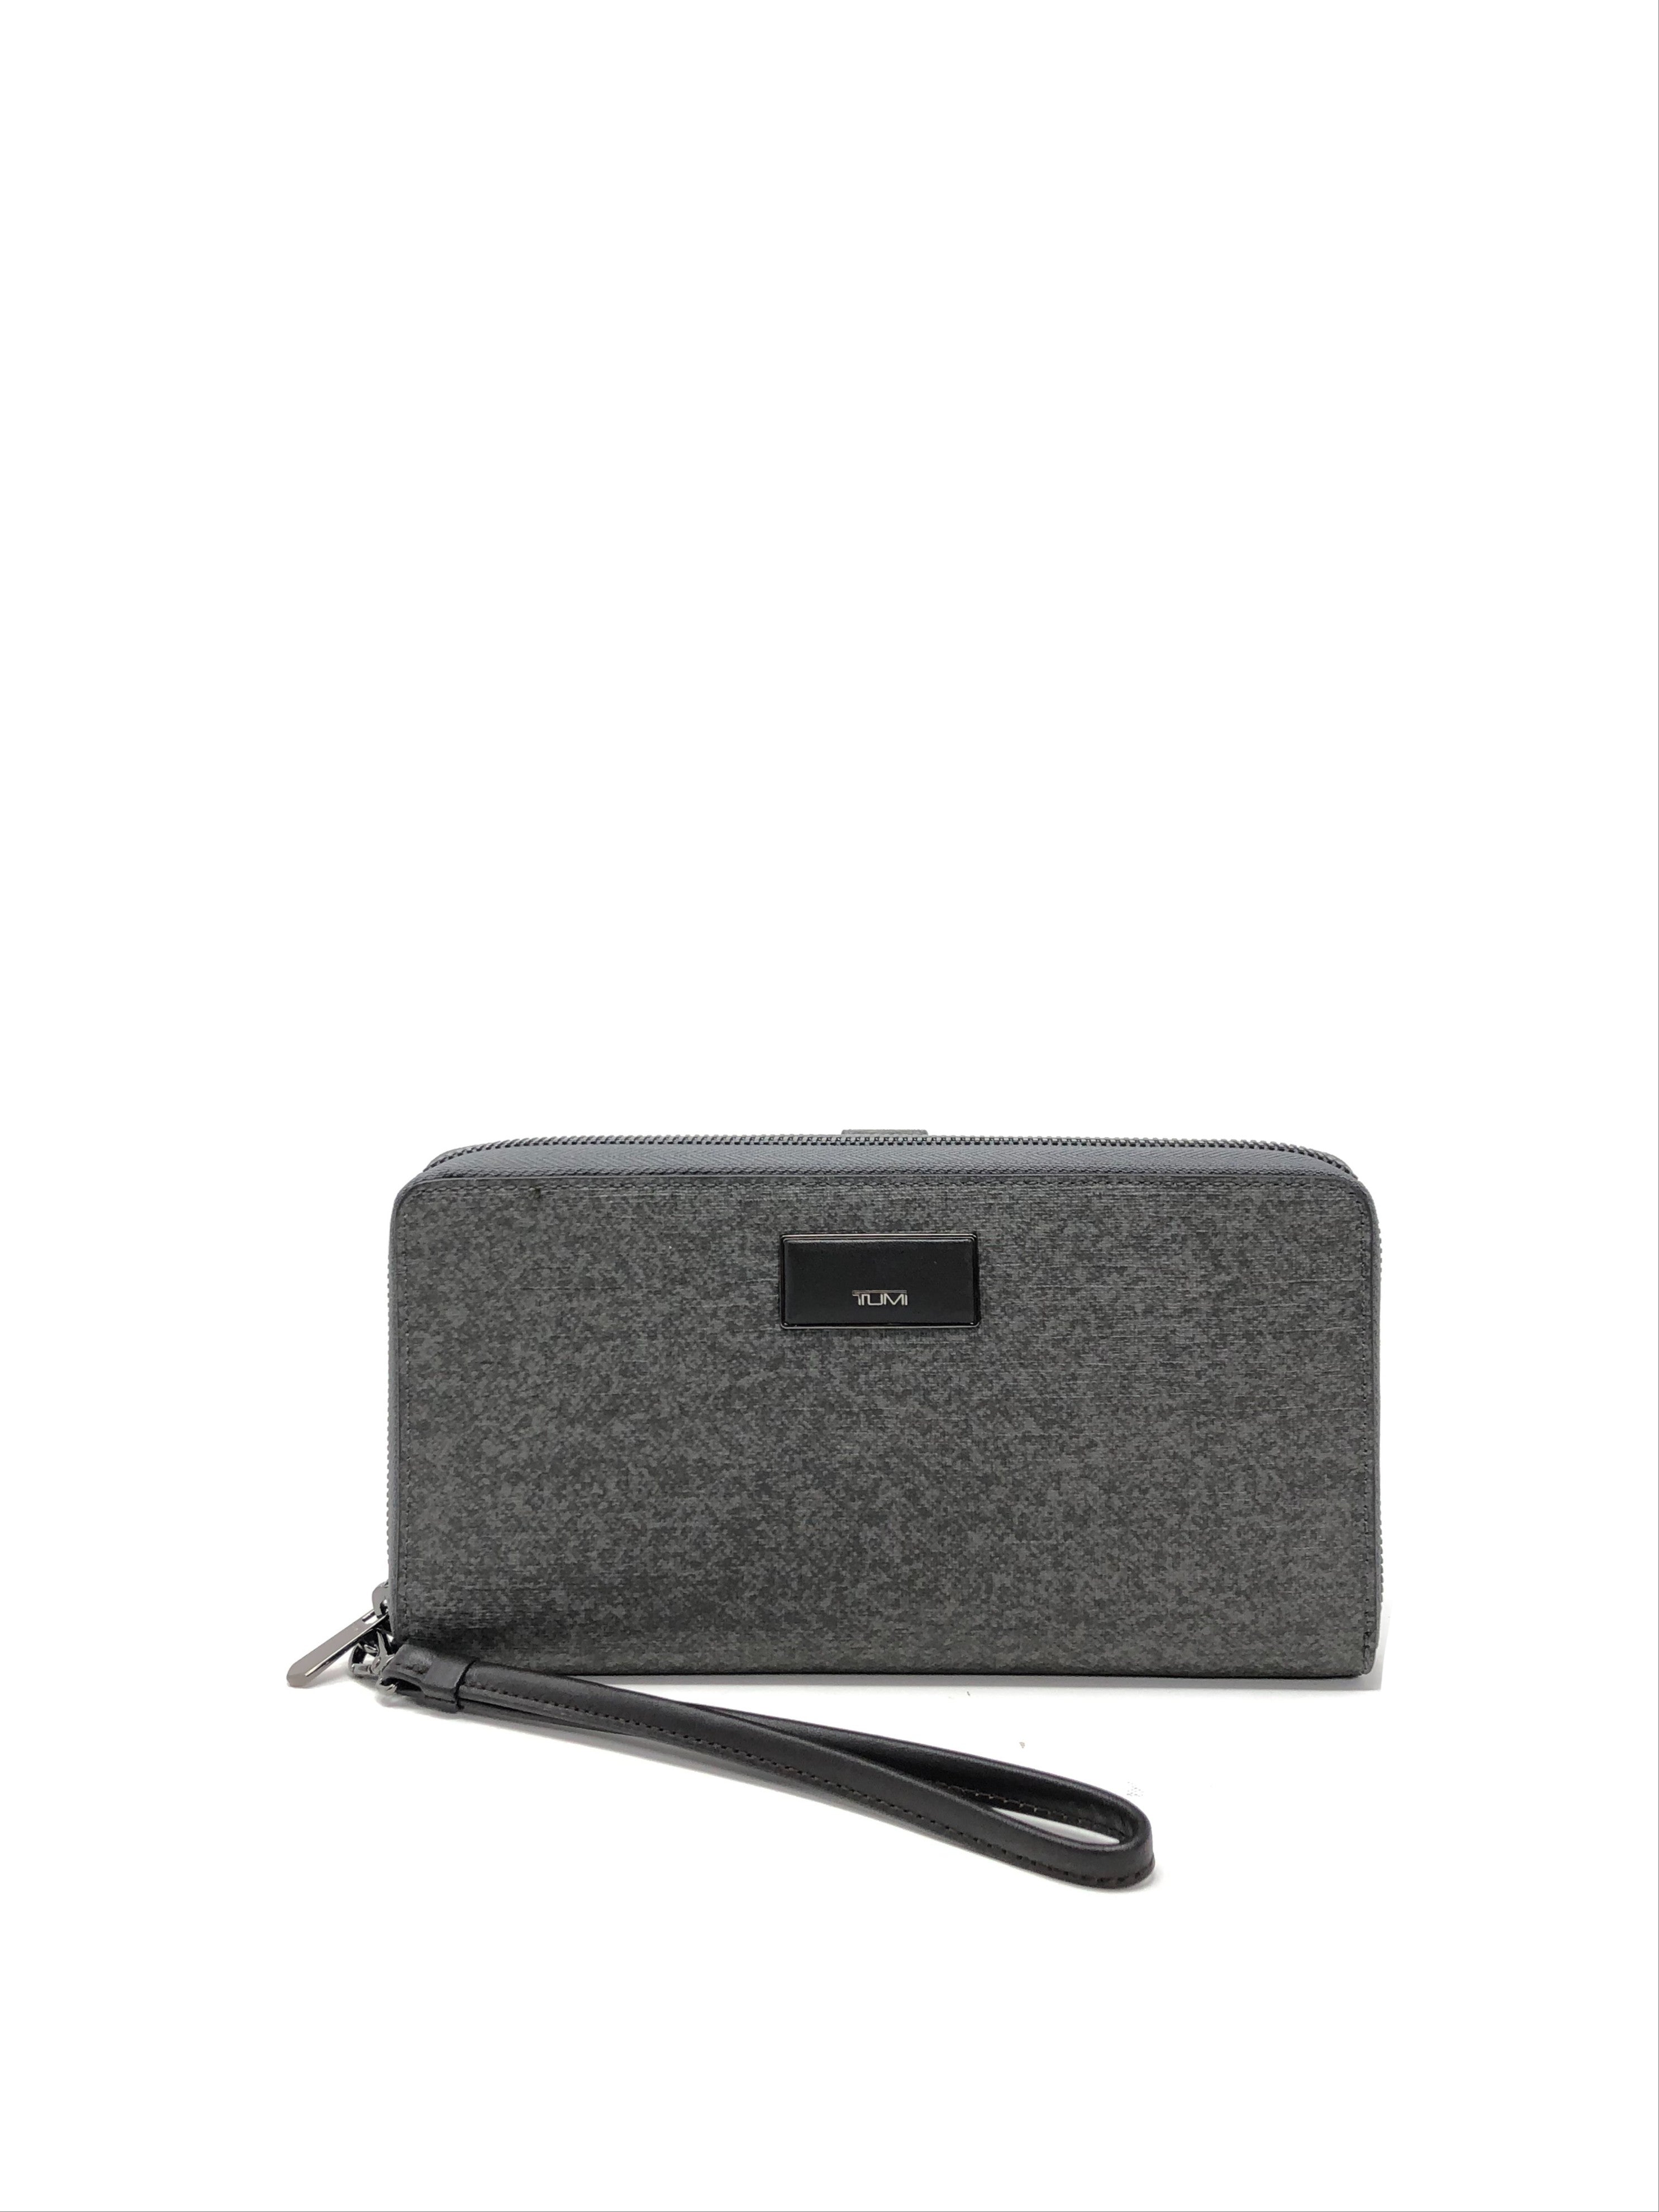 Tumi Black Wallet | World of Watches